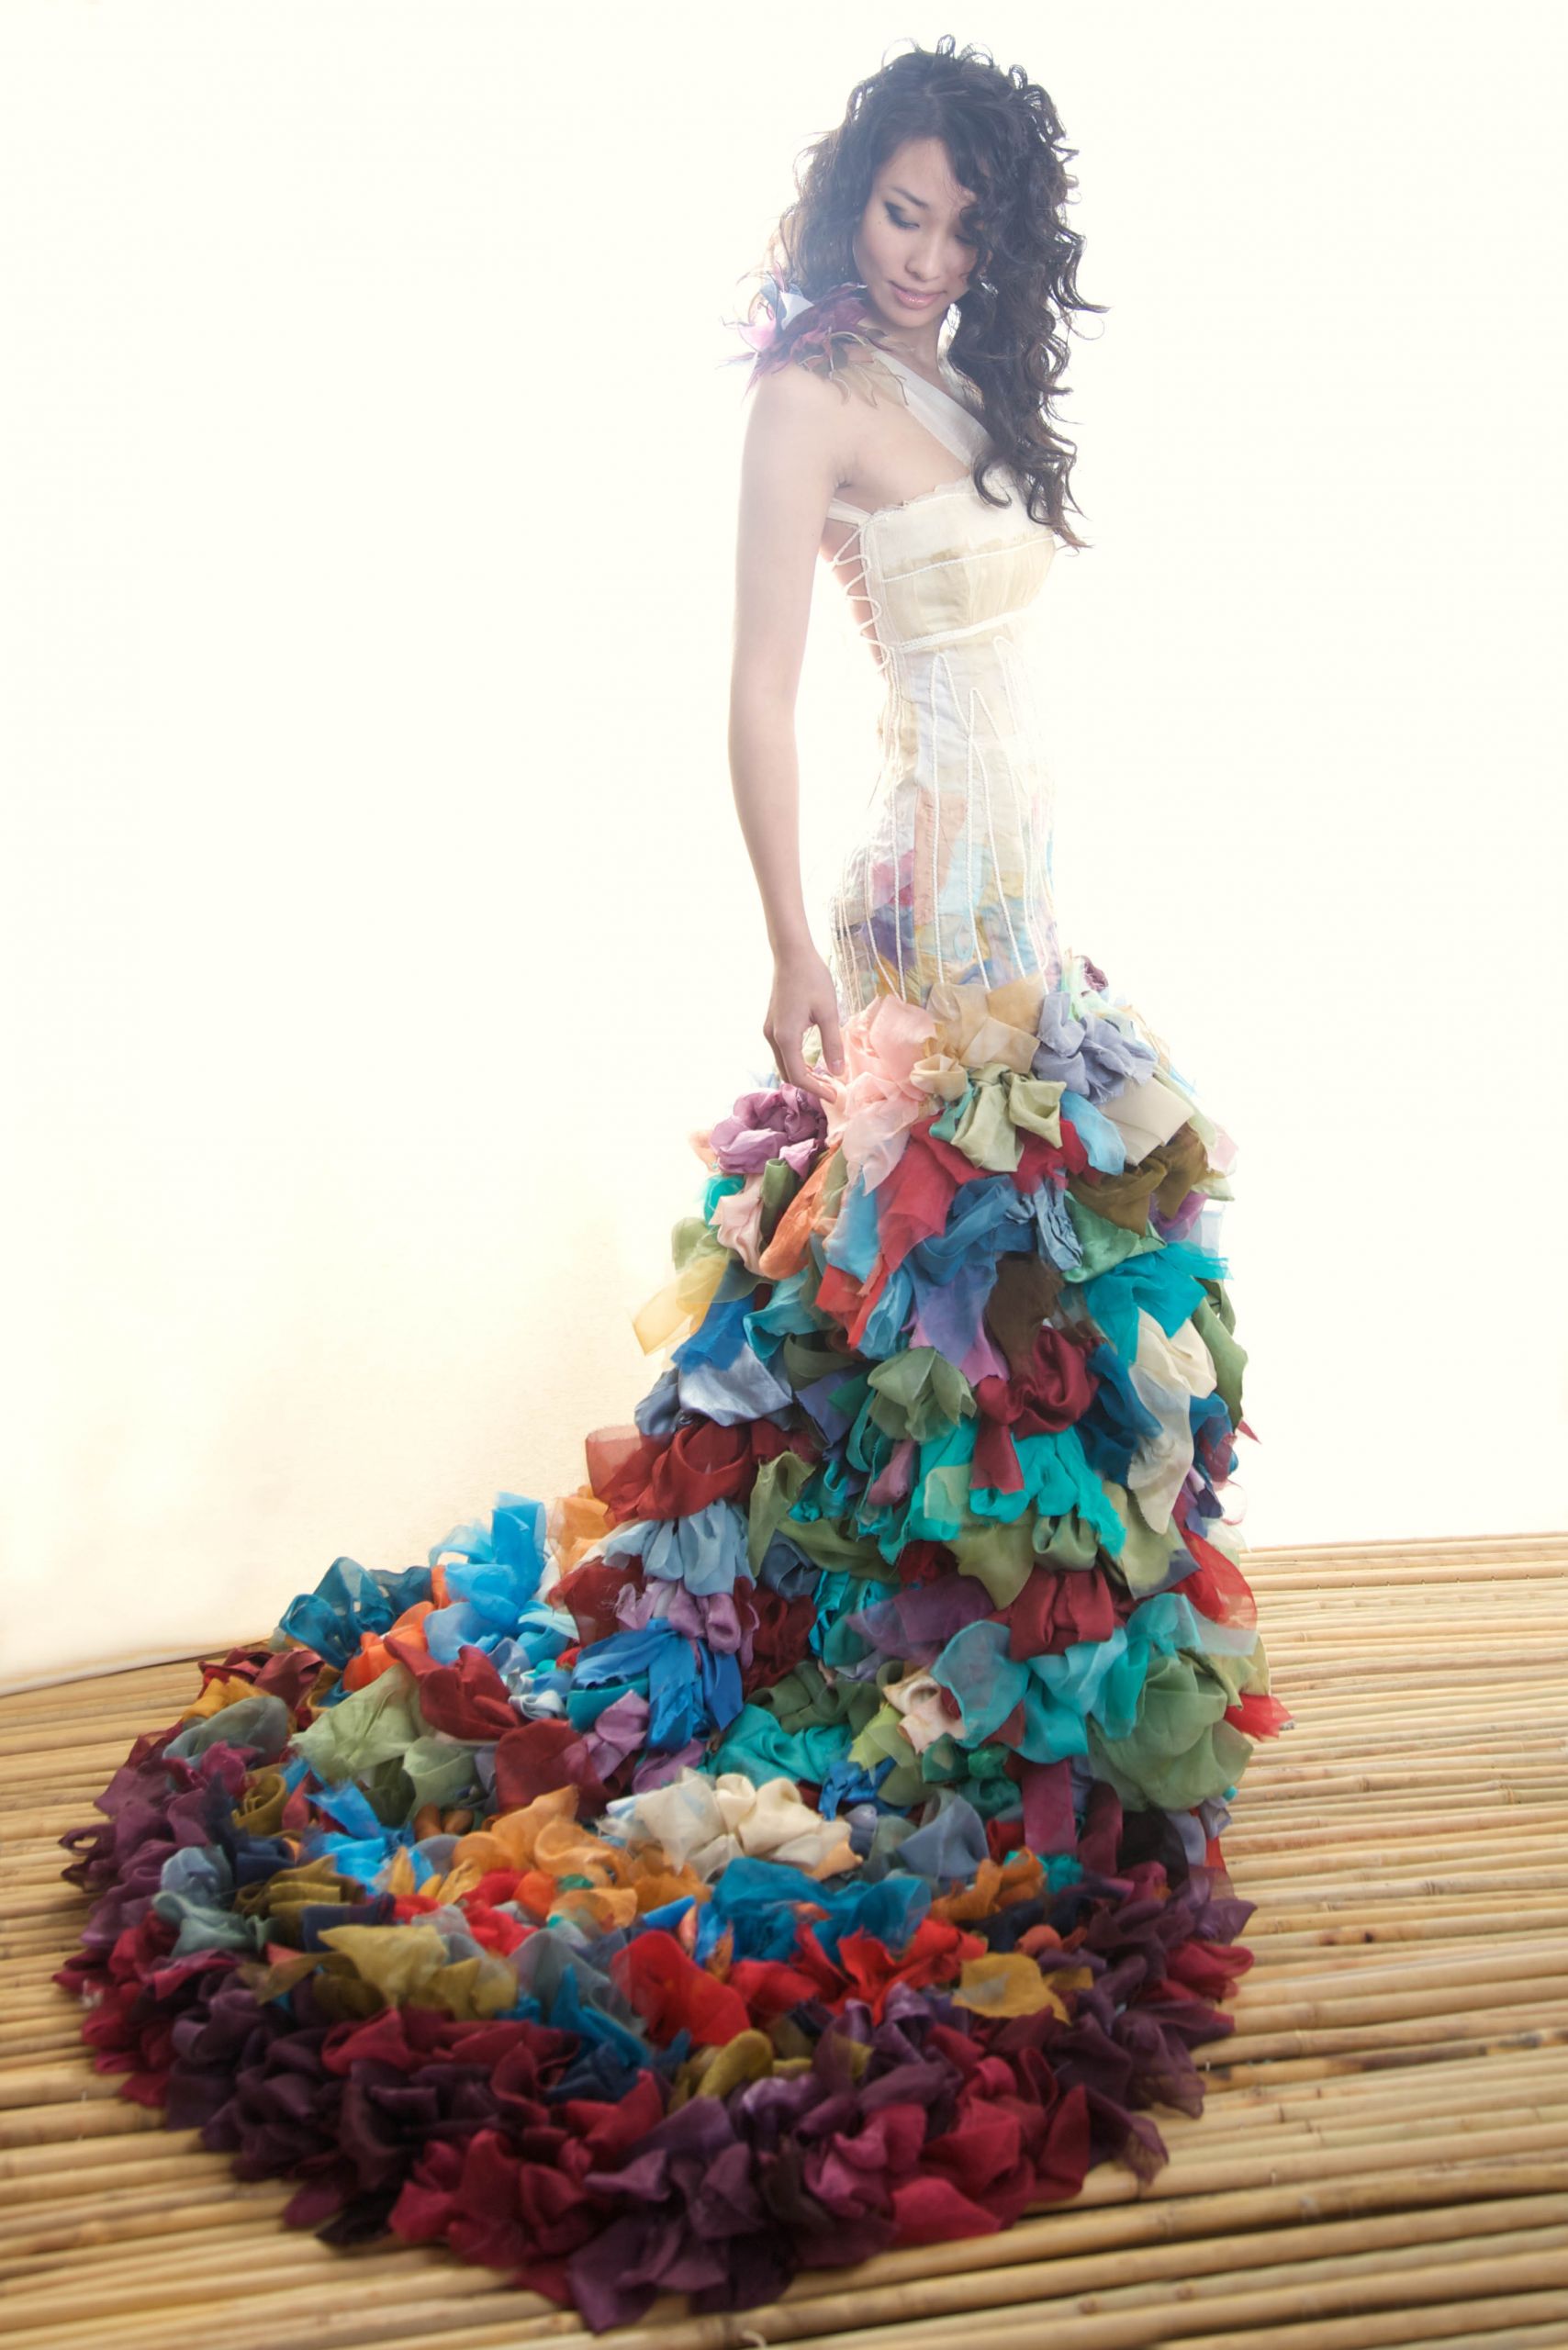 Colorful Wedding Gowns
 Alternative & Colourful Wedding Dresses from Chrissy Wai